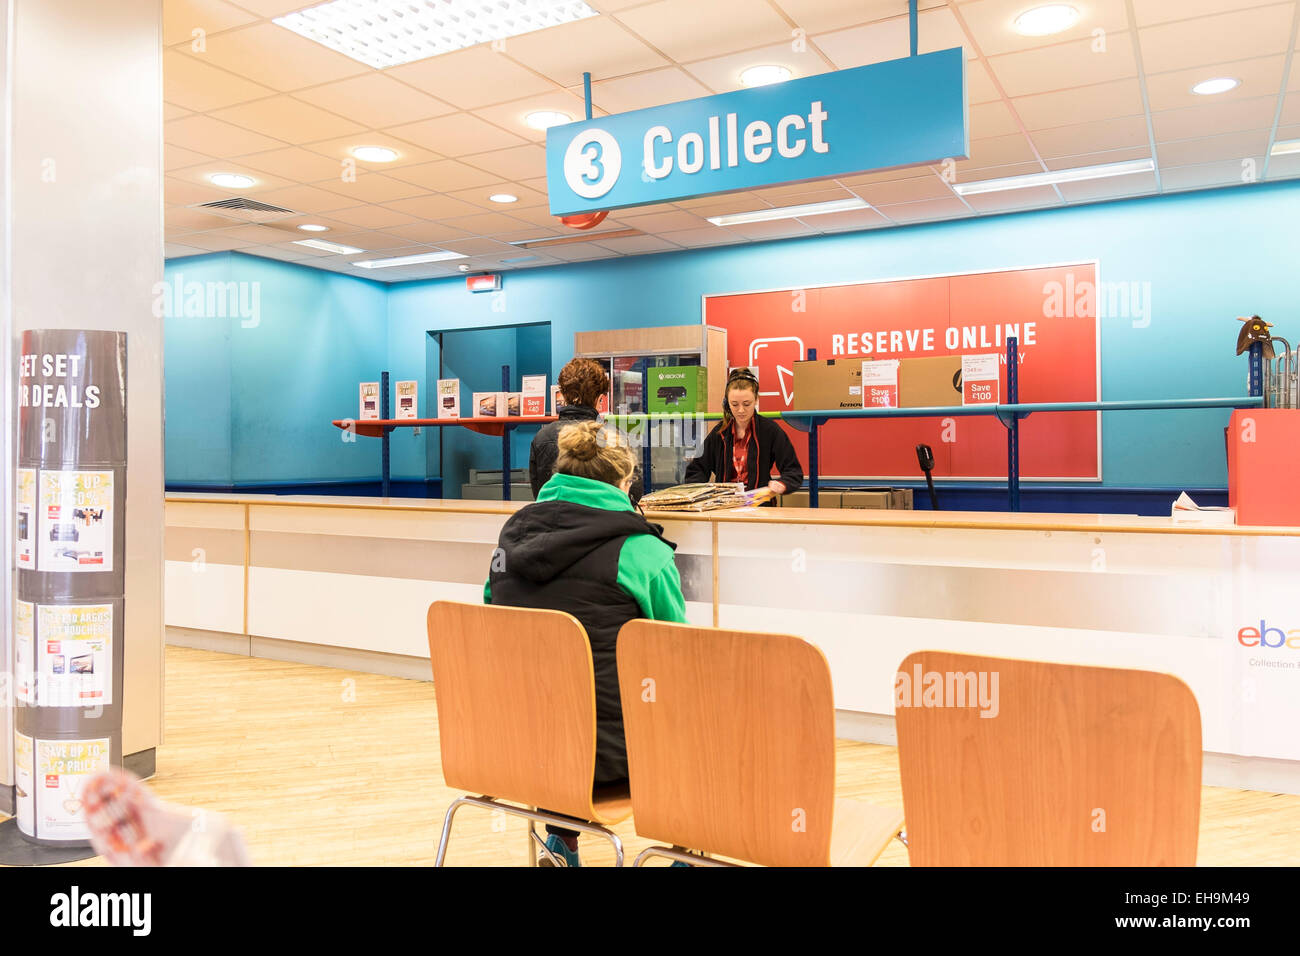 a-customer-waiting-at-the-collection-point-inside-an-argos-store-EH9M49.jpg